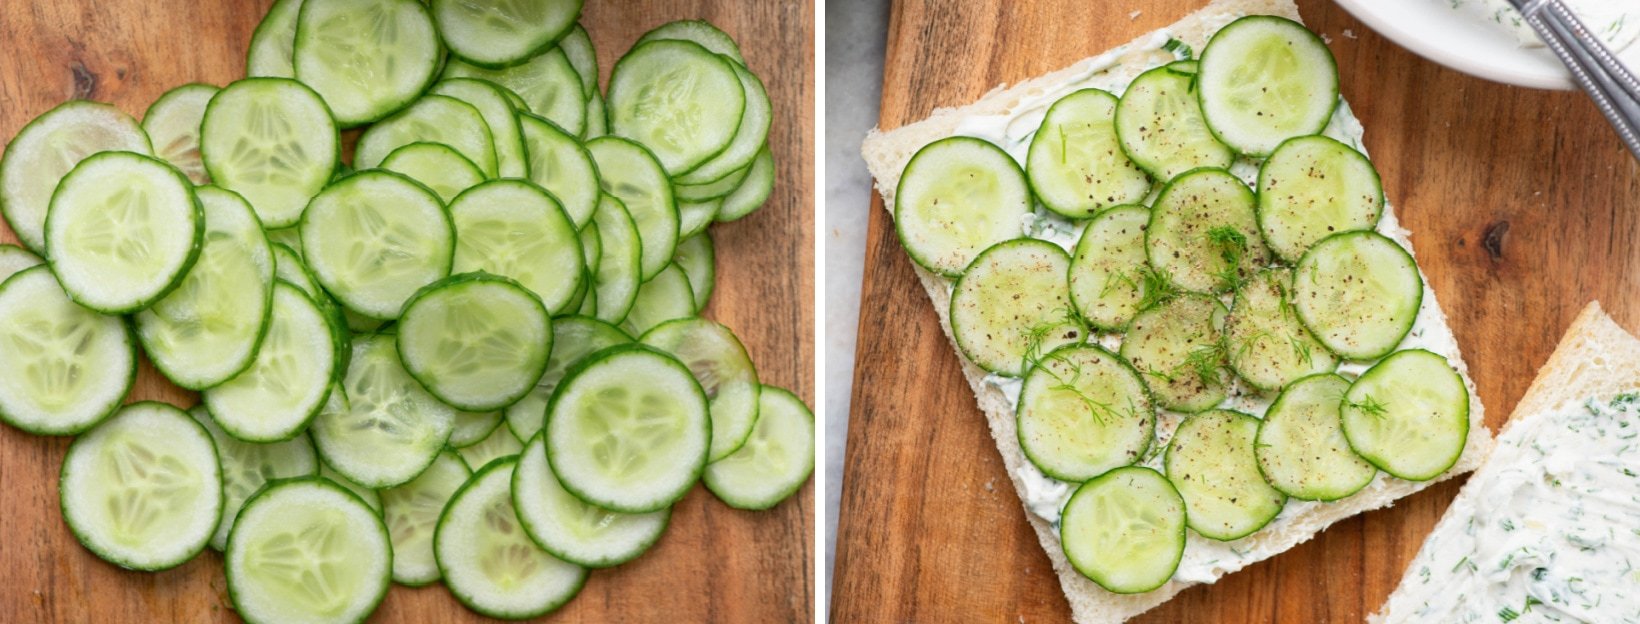 Image shows how to slice cucumbers thinly for sandwich